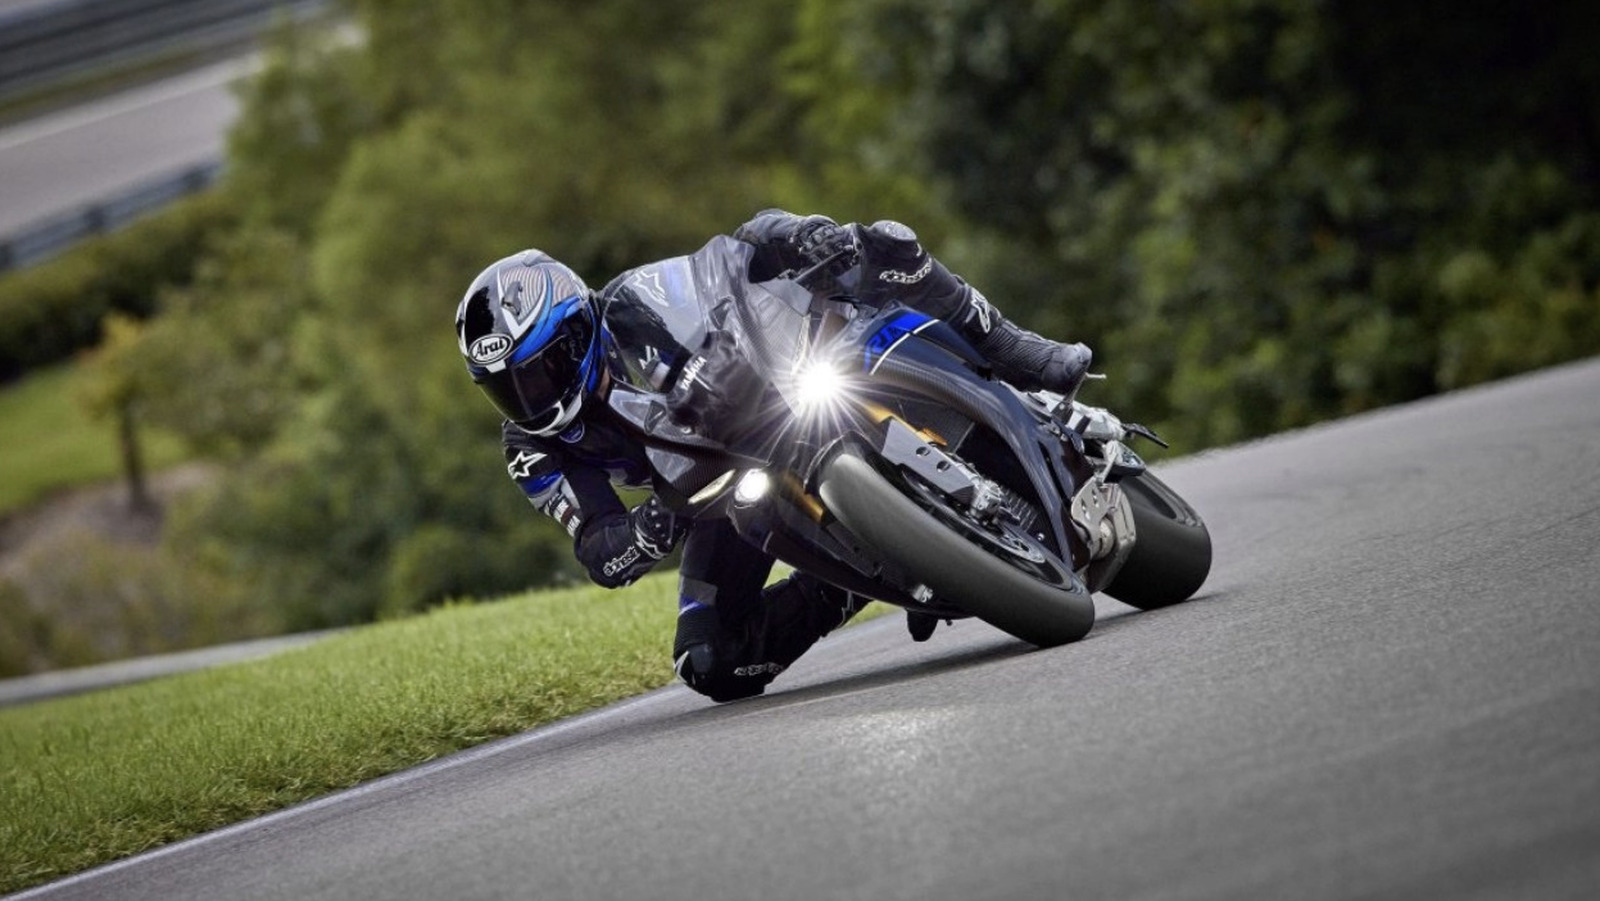 3 Yamaha Motorcycles Suited For Expert Riders